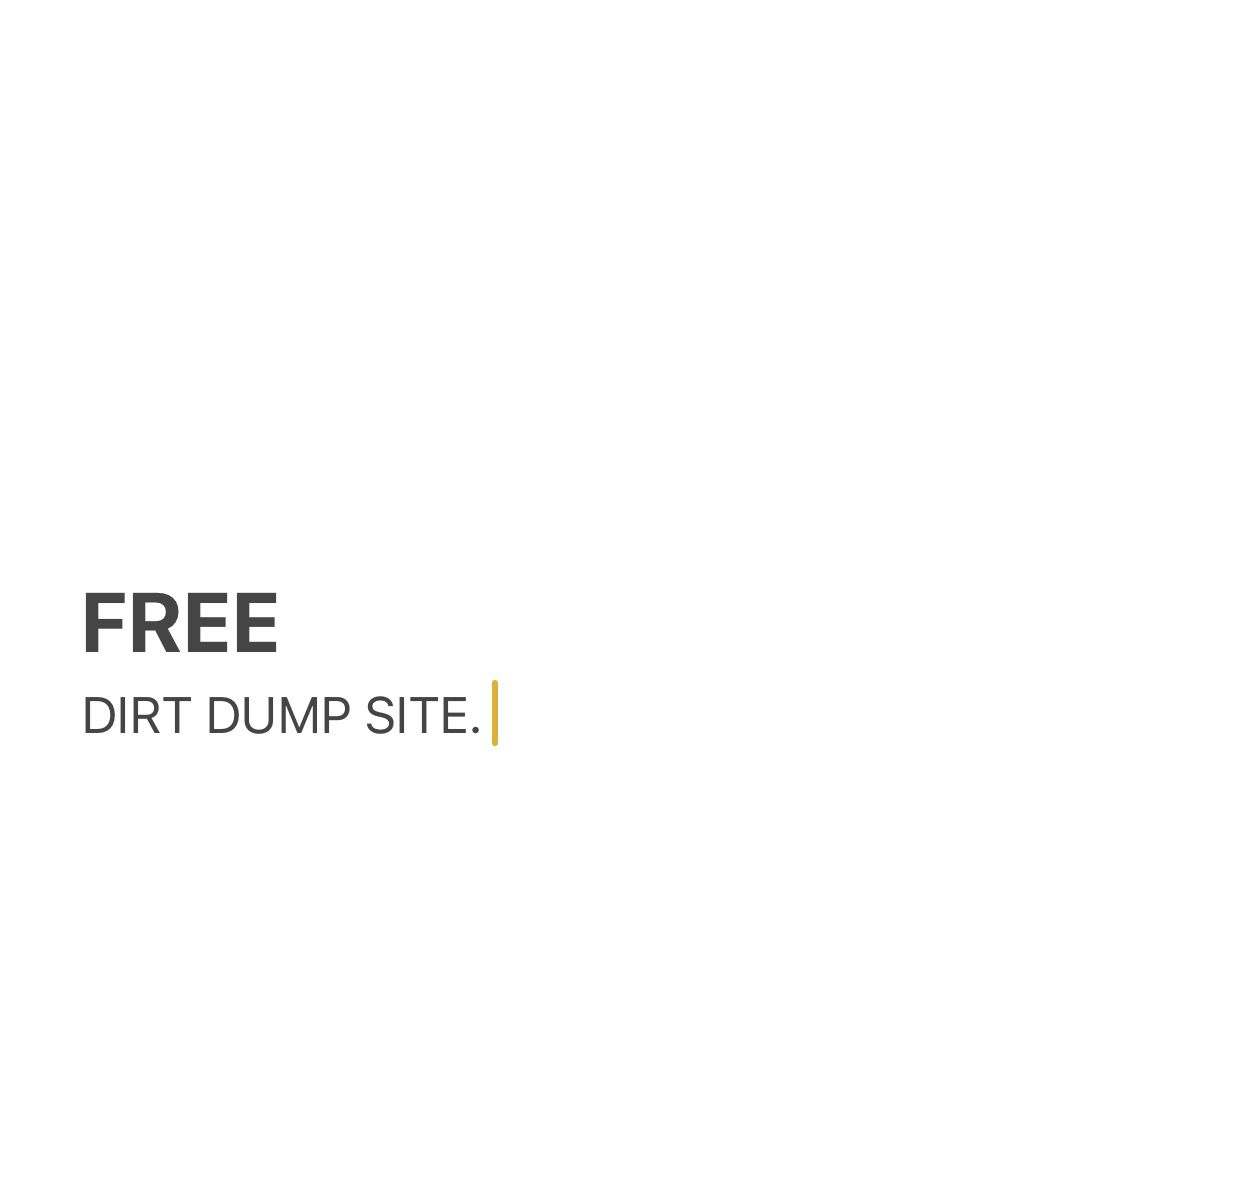 Bring your dirt. Don’t pay for fees